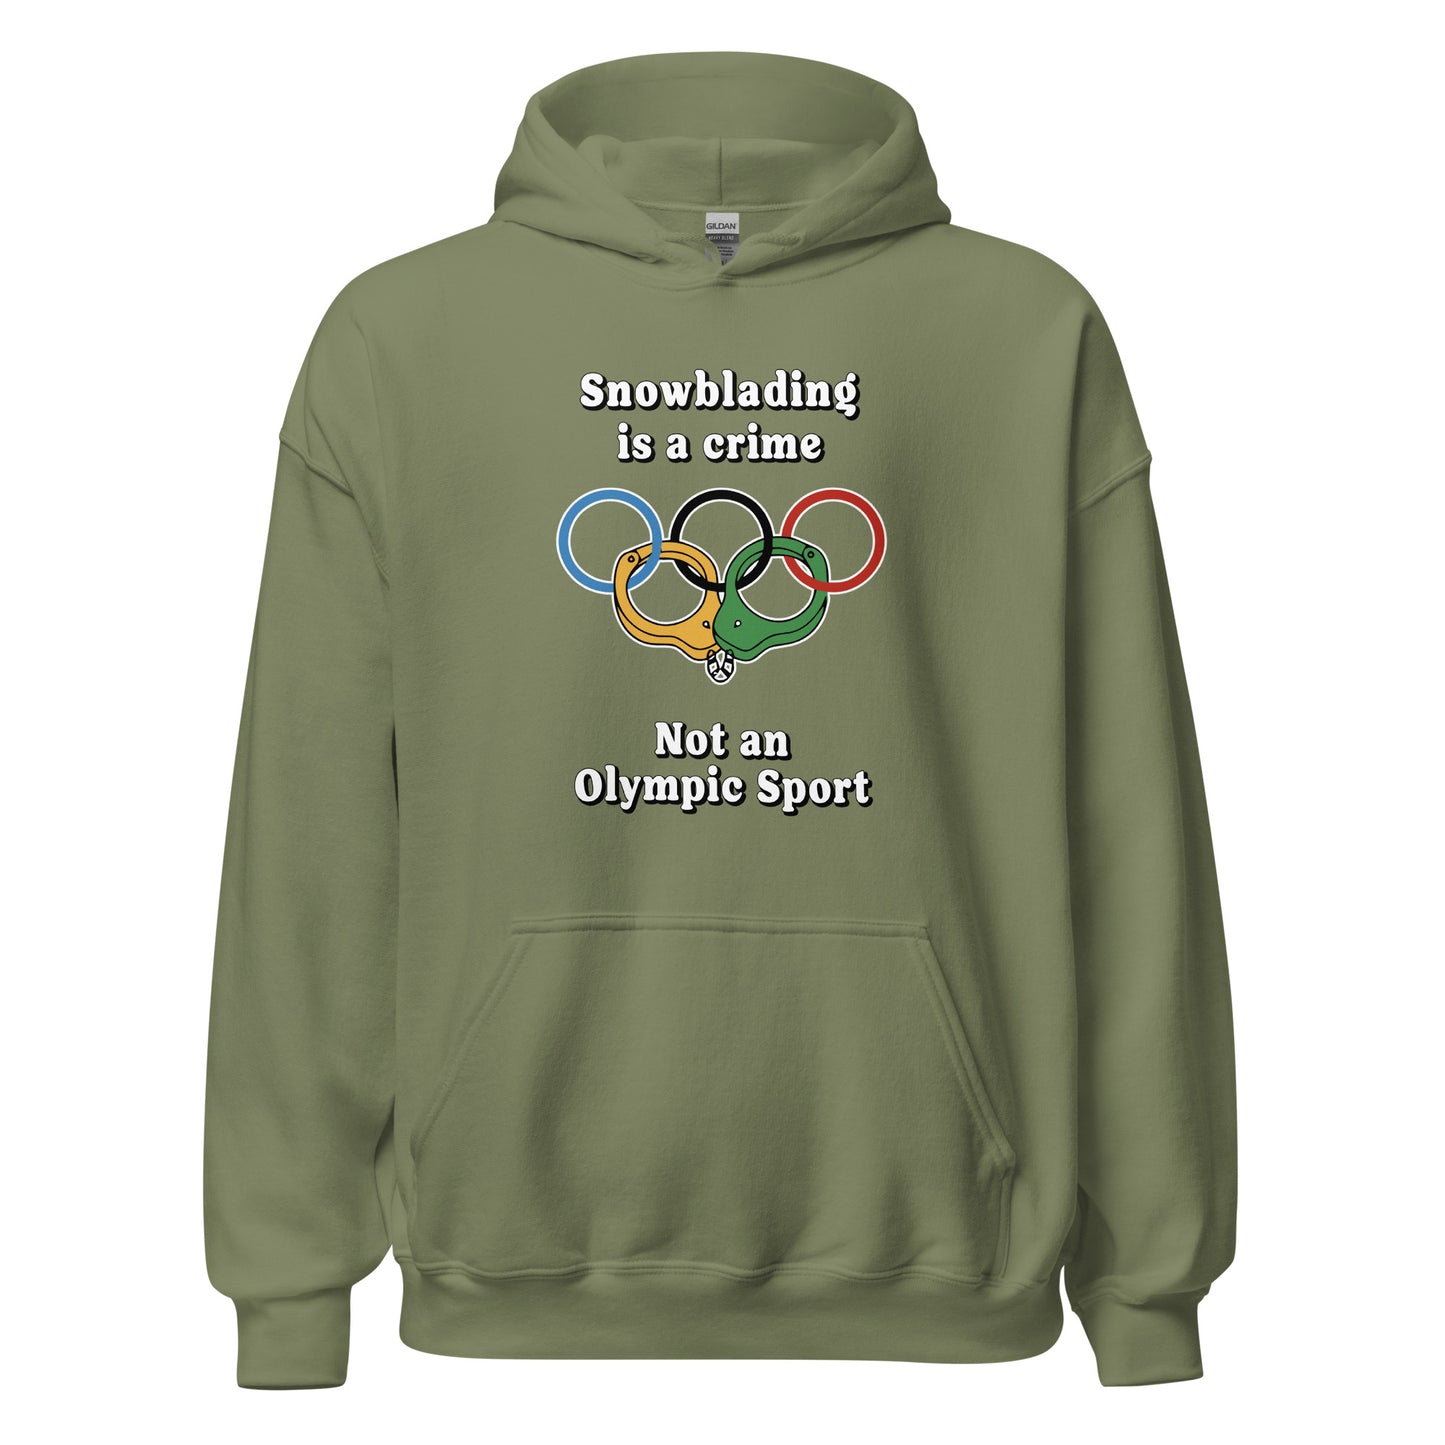 Snowblading is a crime not an olympic sport design on hoodie printed by Whistler Shirts